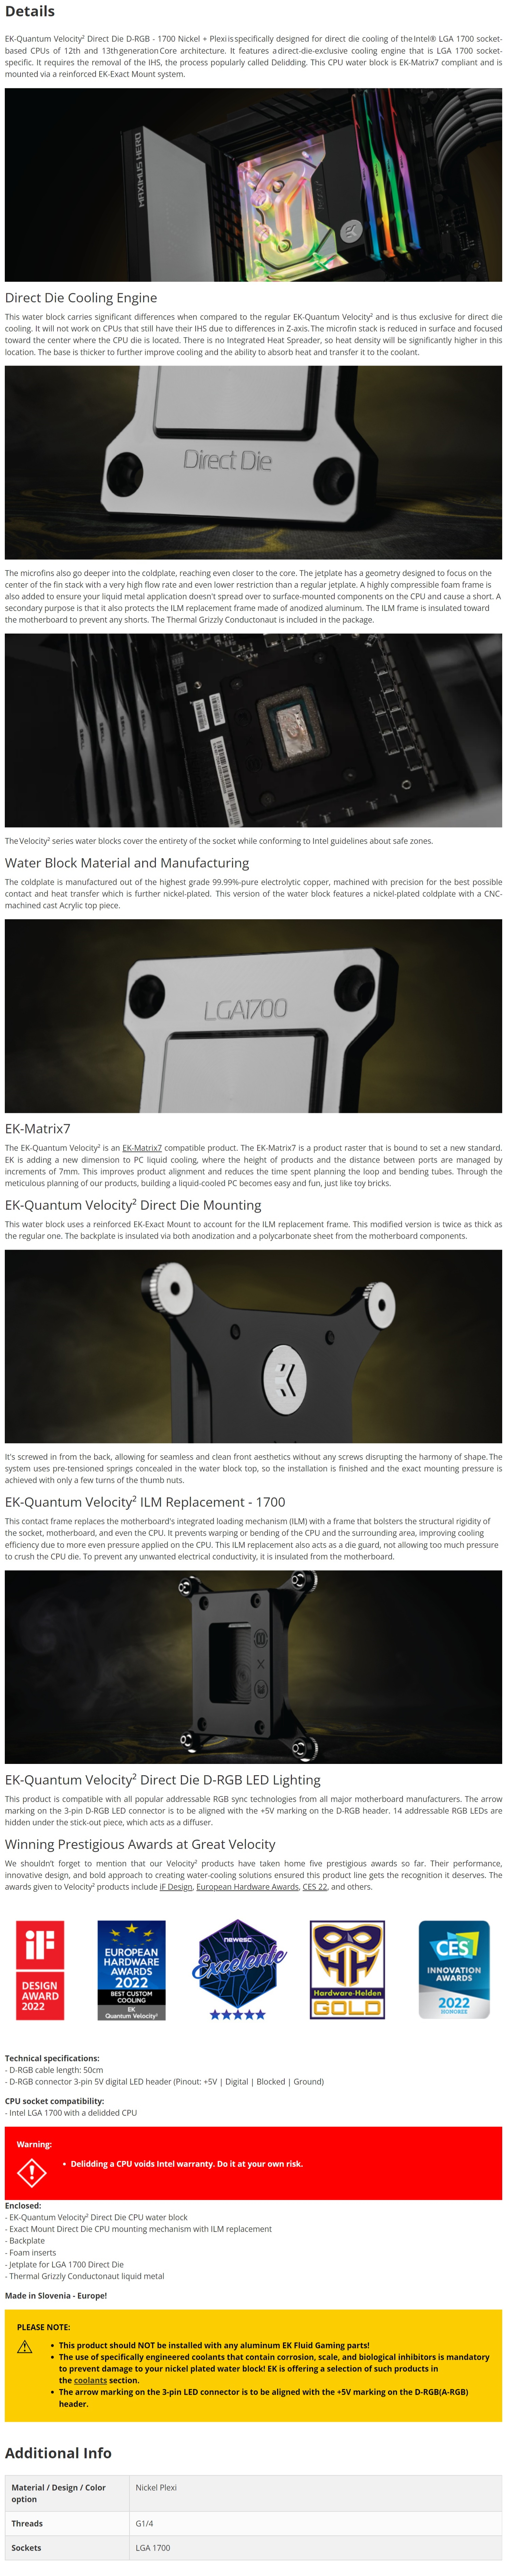 A large marketing image providing additional information about the product EK Quantum Velocity2 Direct Die D-RGB 1700 CPU Waterblock - Nickel+Plexi - Additional alt info not provided